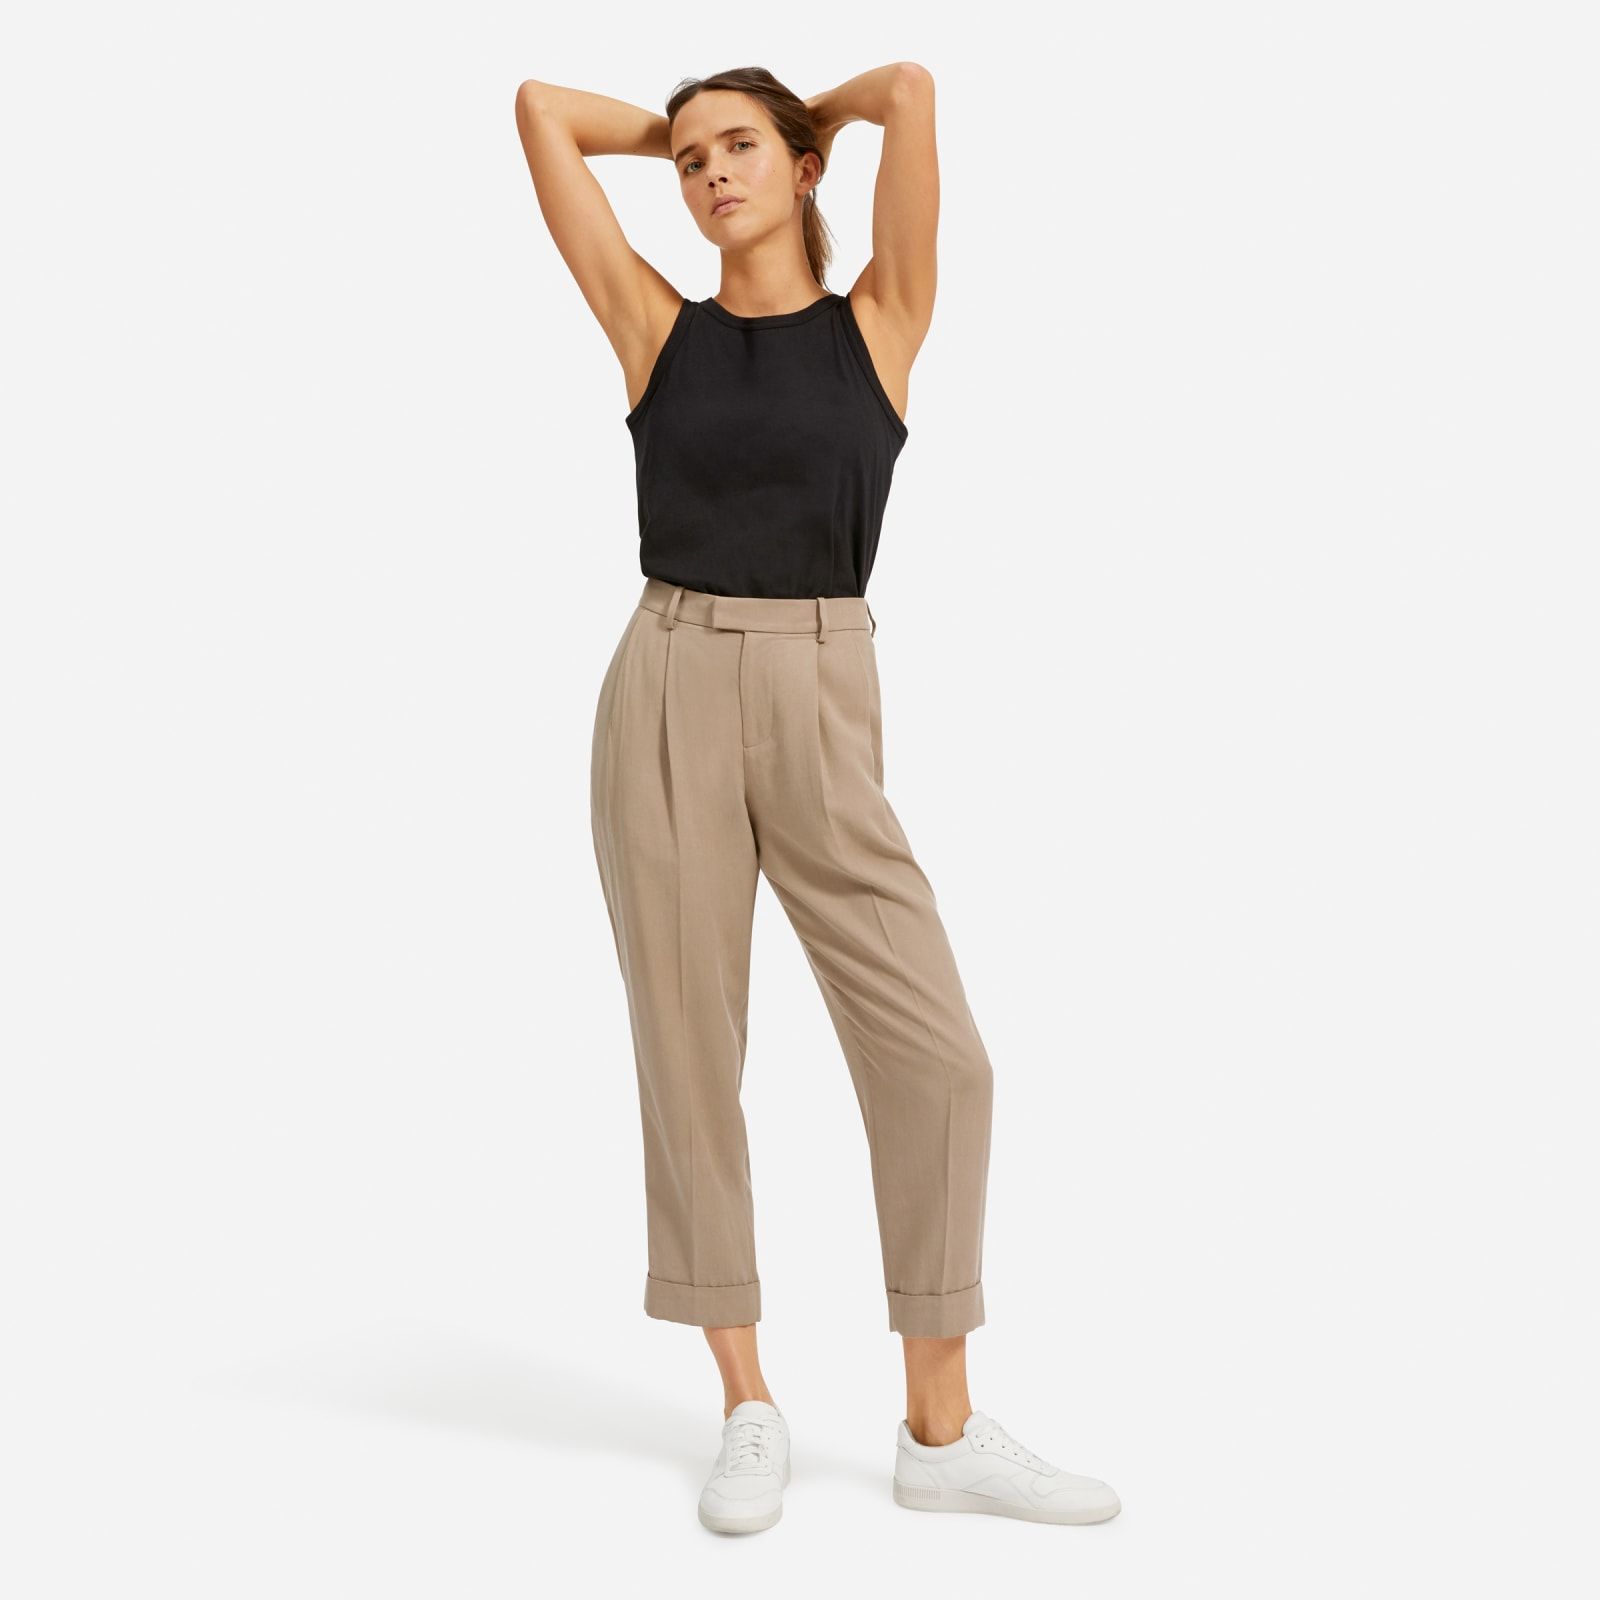 Women's Put-Together Pleat Pant by Everlane in Clay, Size 14 | Everlane